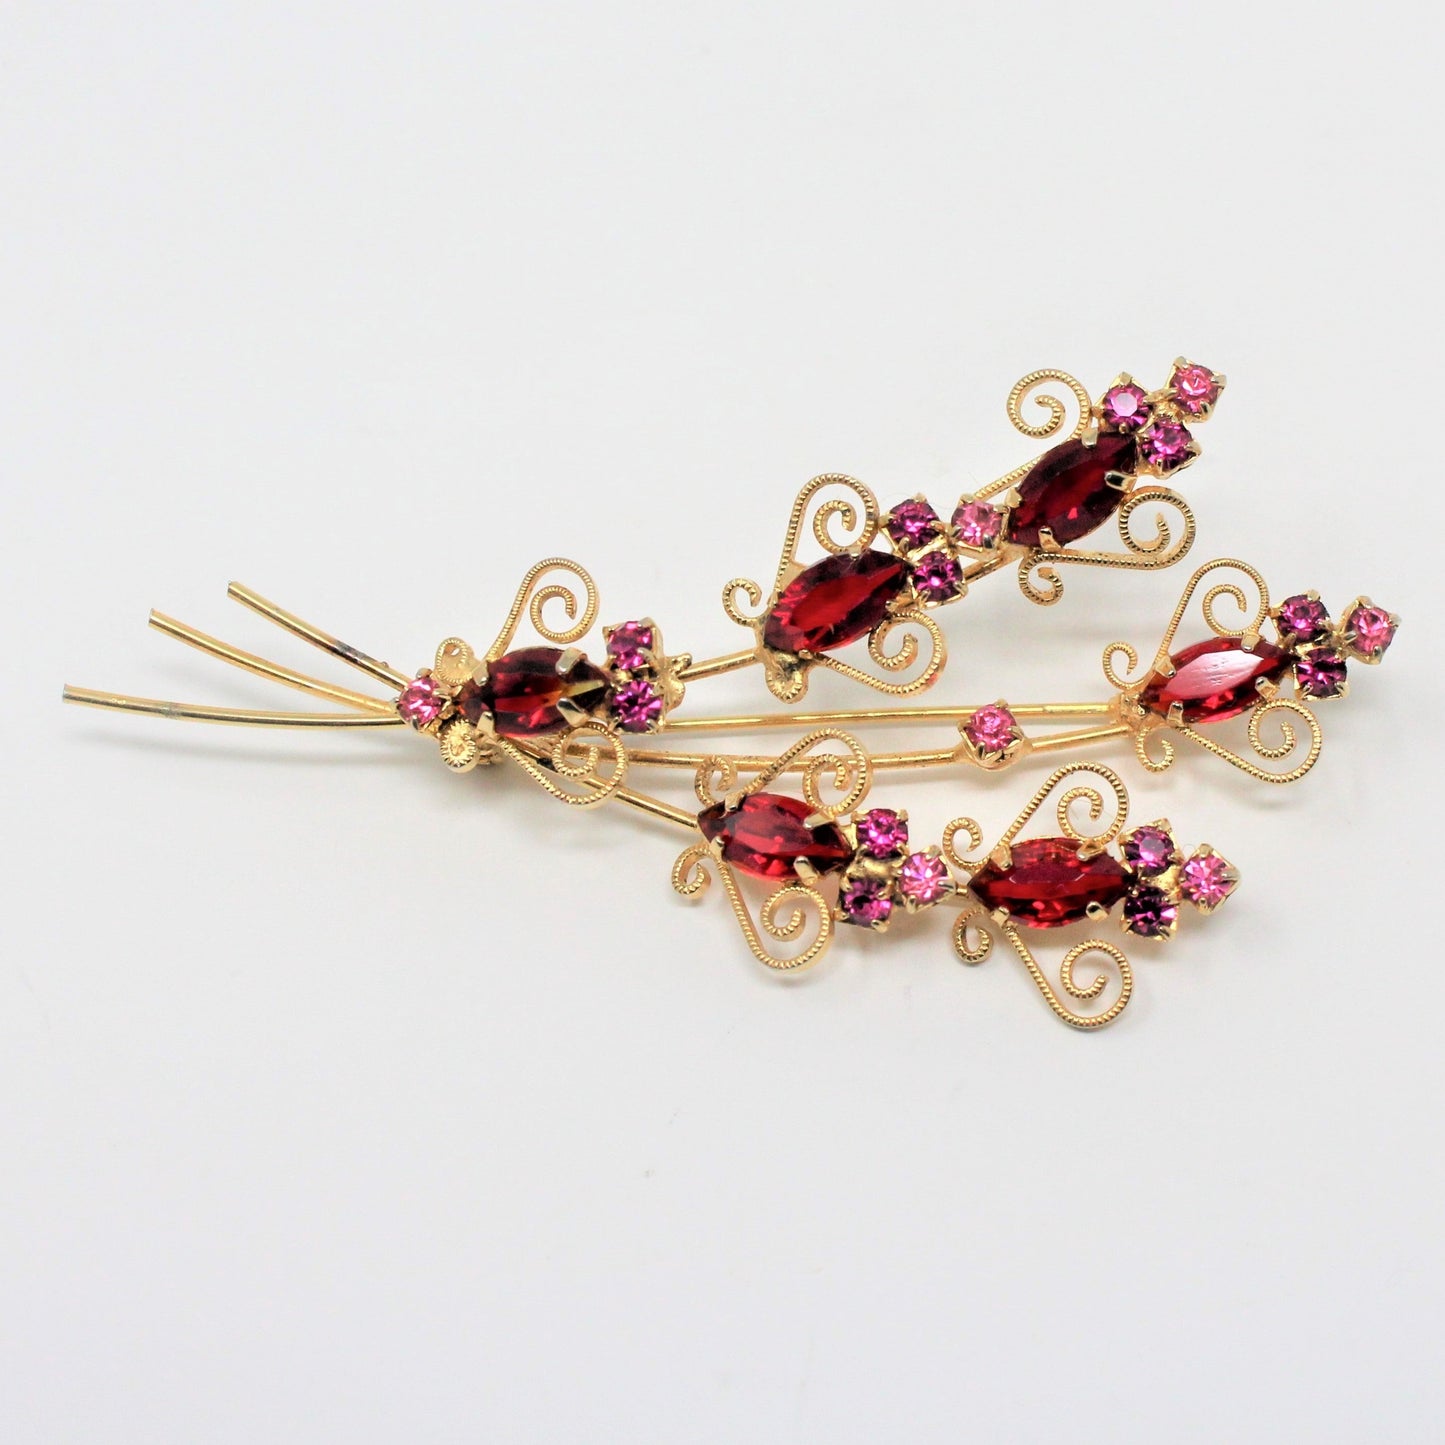 Brooch / Pin, Floral Bouquet, Red and Pink Rhinestones, Gold Filigree, Vintage